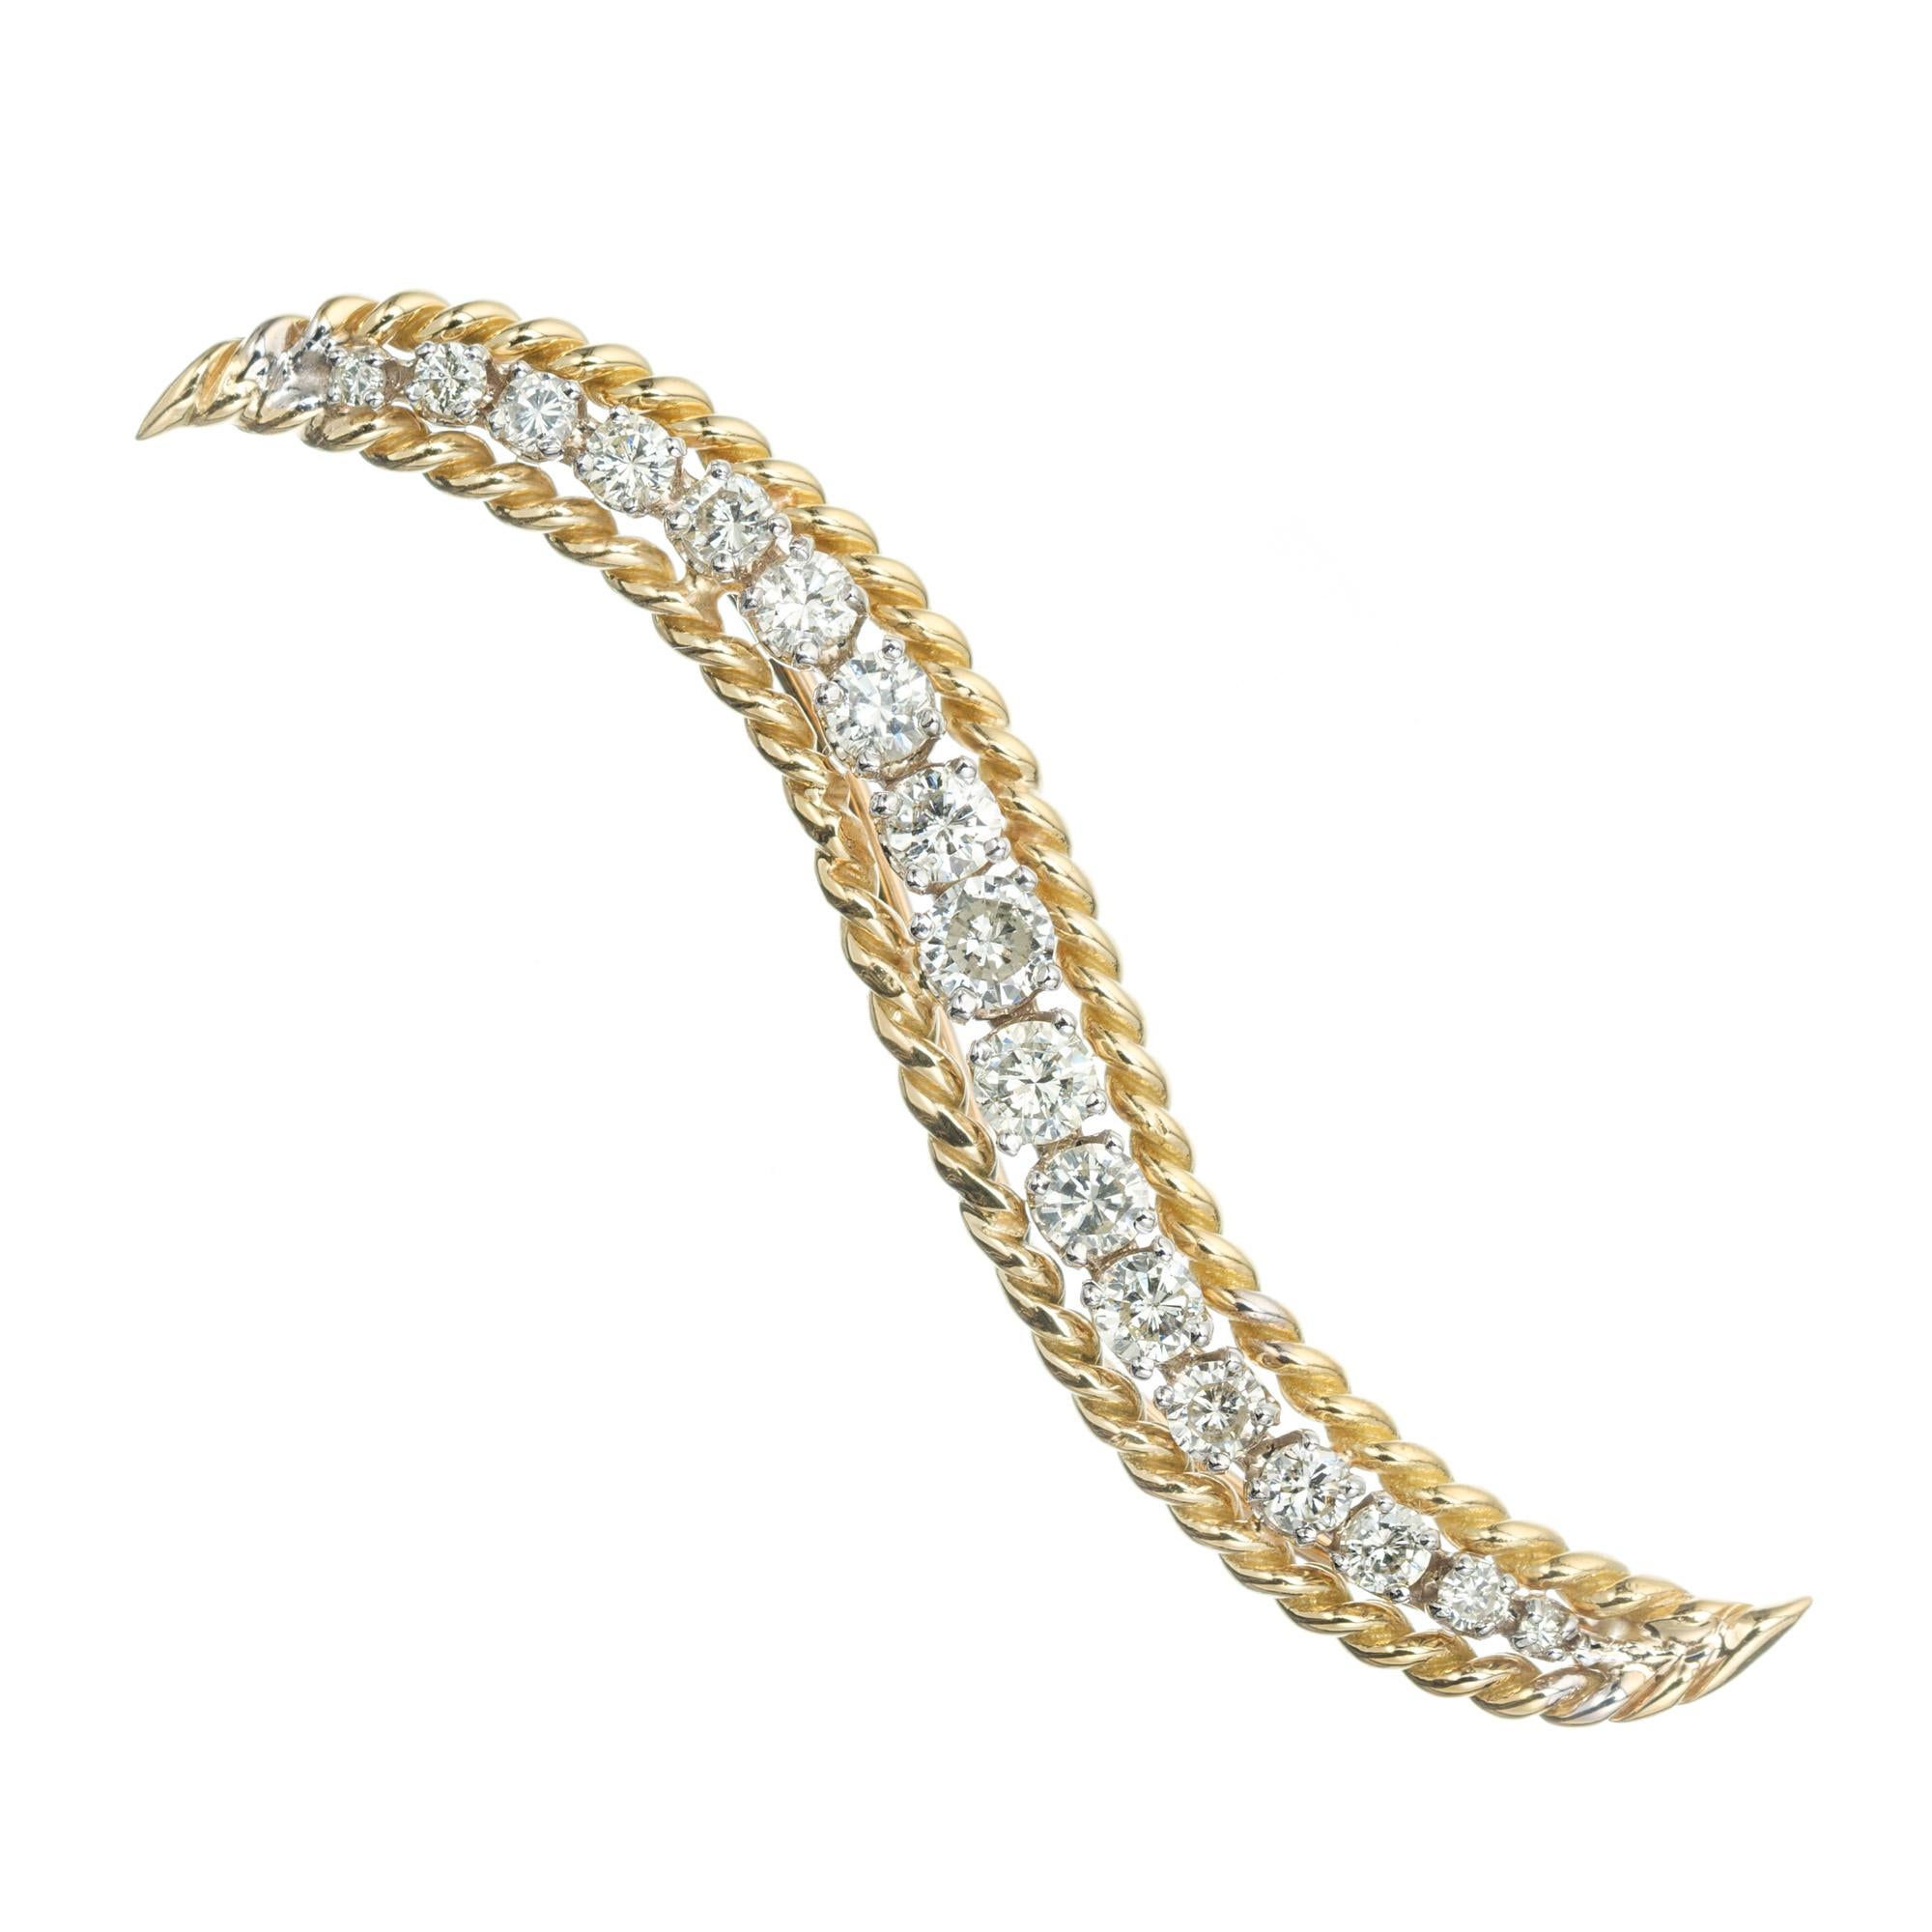 18k yellow gold and platinum, Swirl brooch with 17 round graduated diamonds. 

17 round diamonds, I SI2 approx. .75cts
18k yellow gold 
Platinum 
5.1 grams
Top to bottom: 10.4mm or .40 Inches
Width: 51.3mm or 2 Inches
Depth or thickness: 3.9mm
